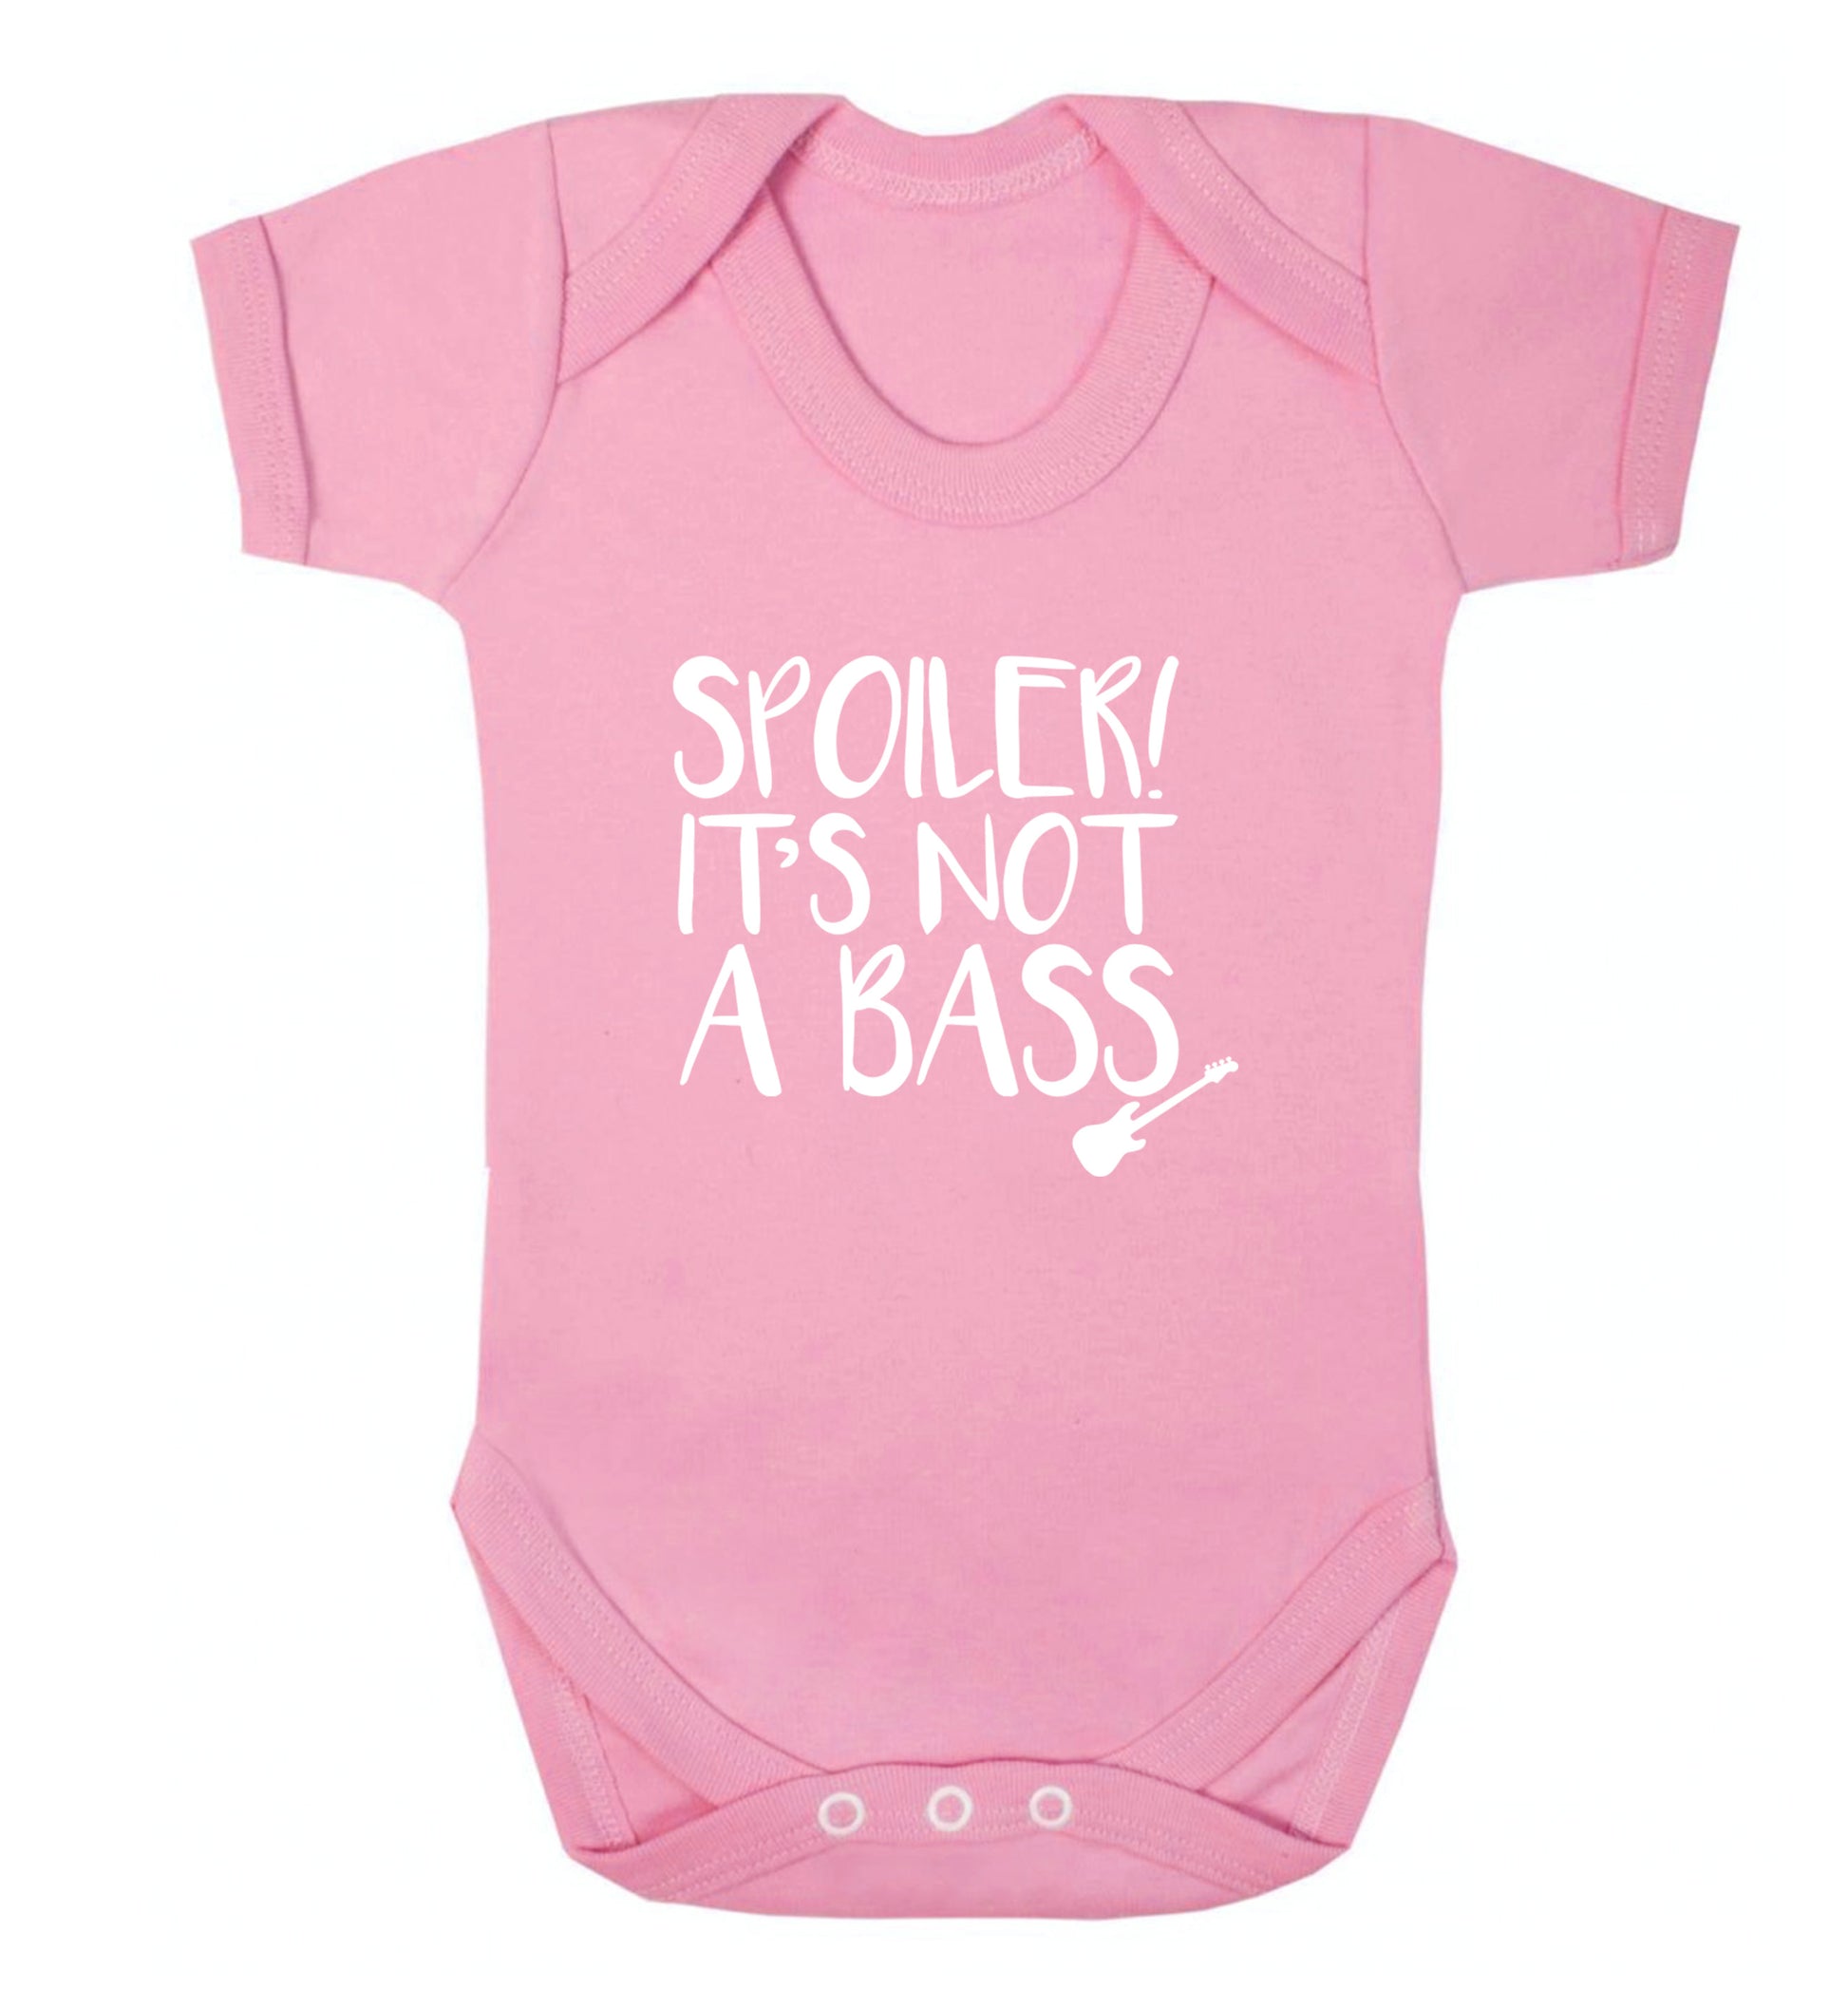 Spoiler it's not a bass Baby Vest pale pink 18-24 months